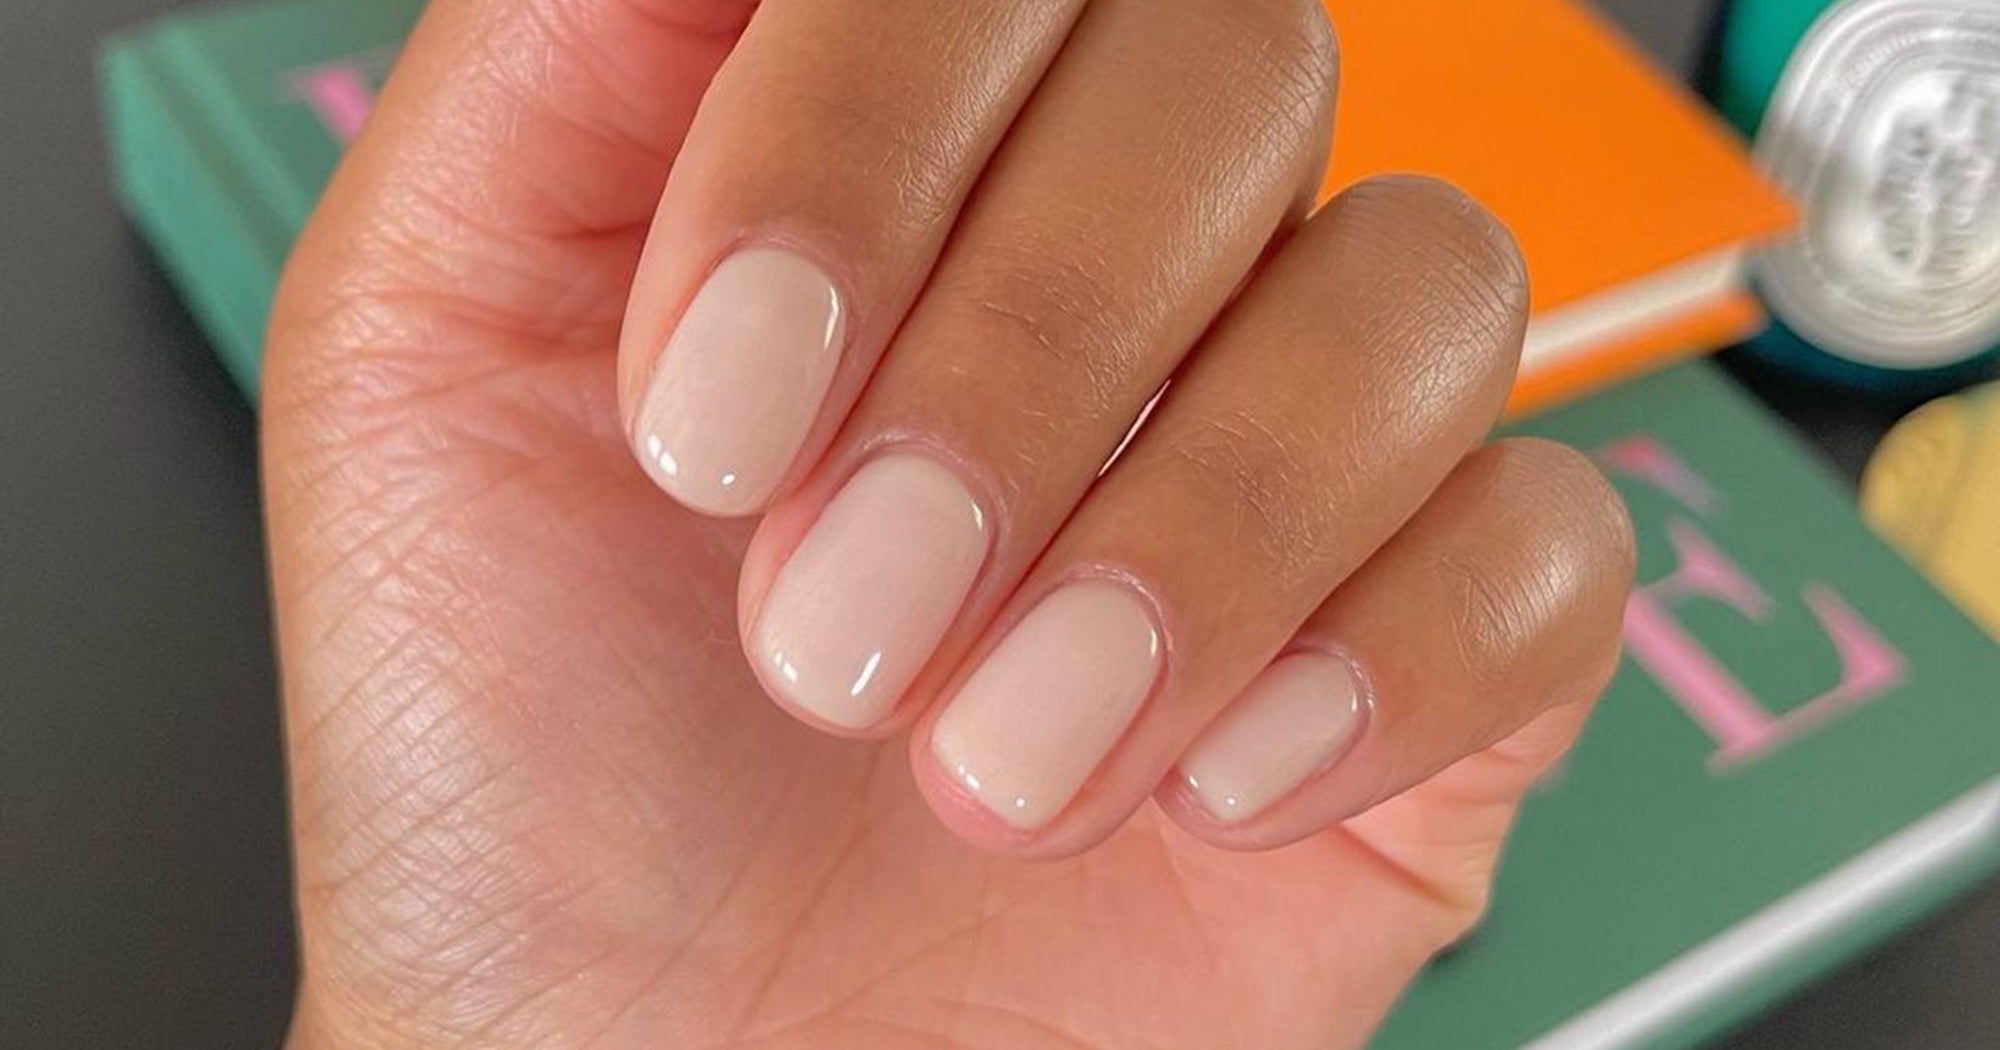 Here’s Why Bio Sculpture Is Replacing Traditional Gels